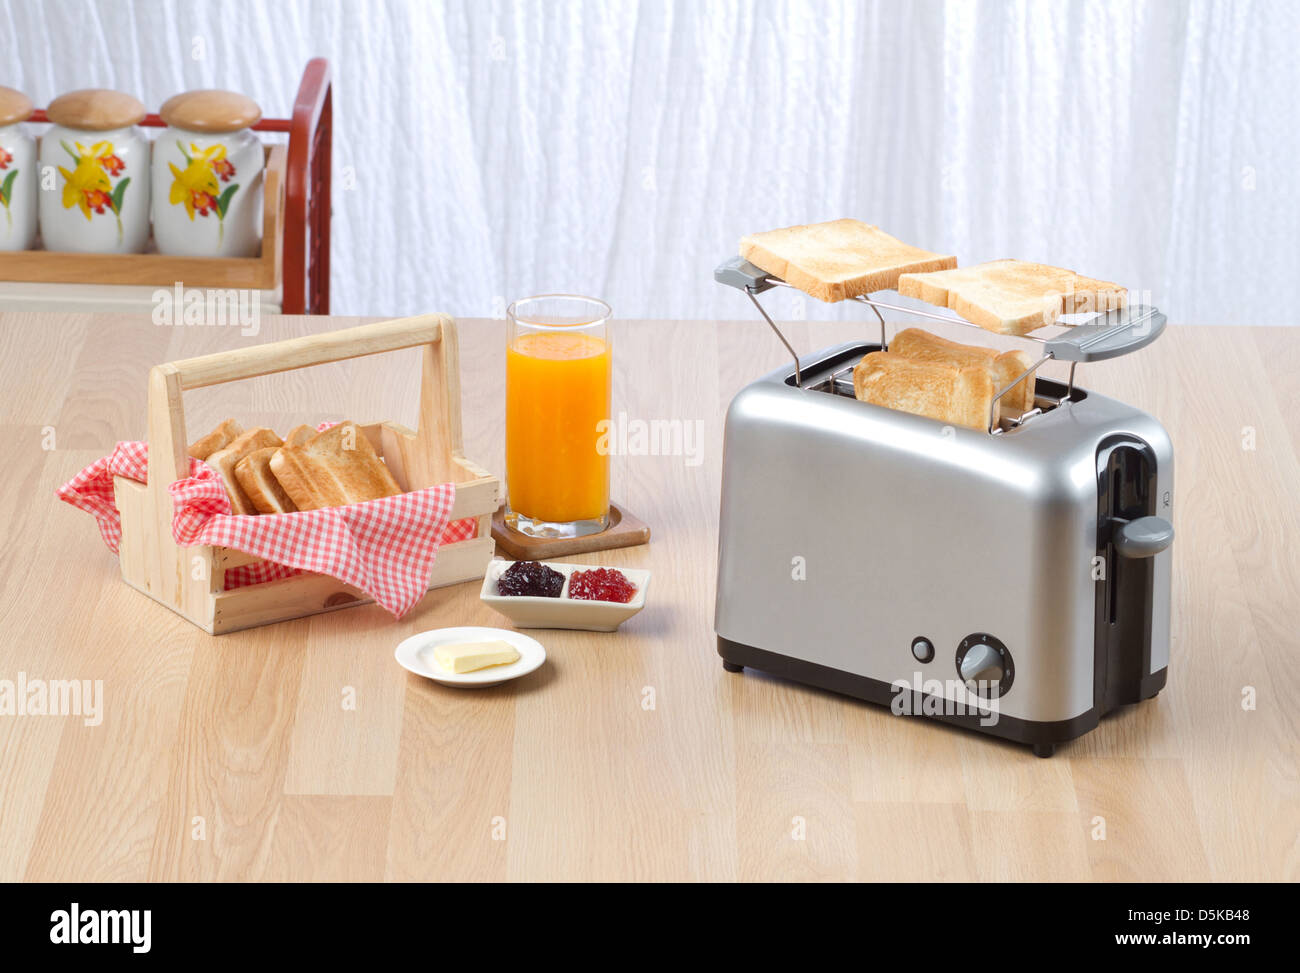 Bread toaster the kitchenware you need for preparing your breakfast Stock Photo